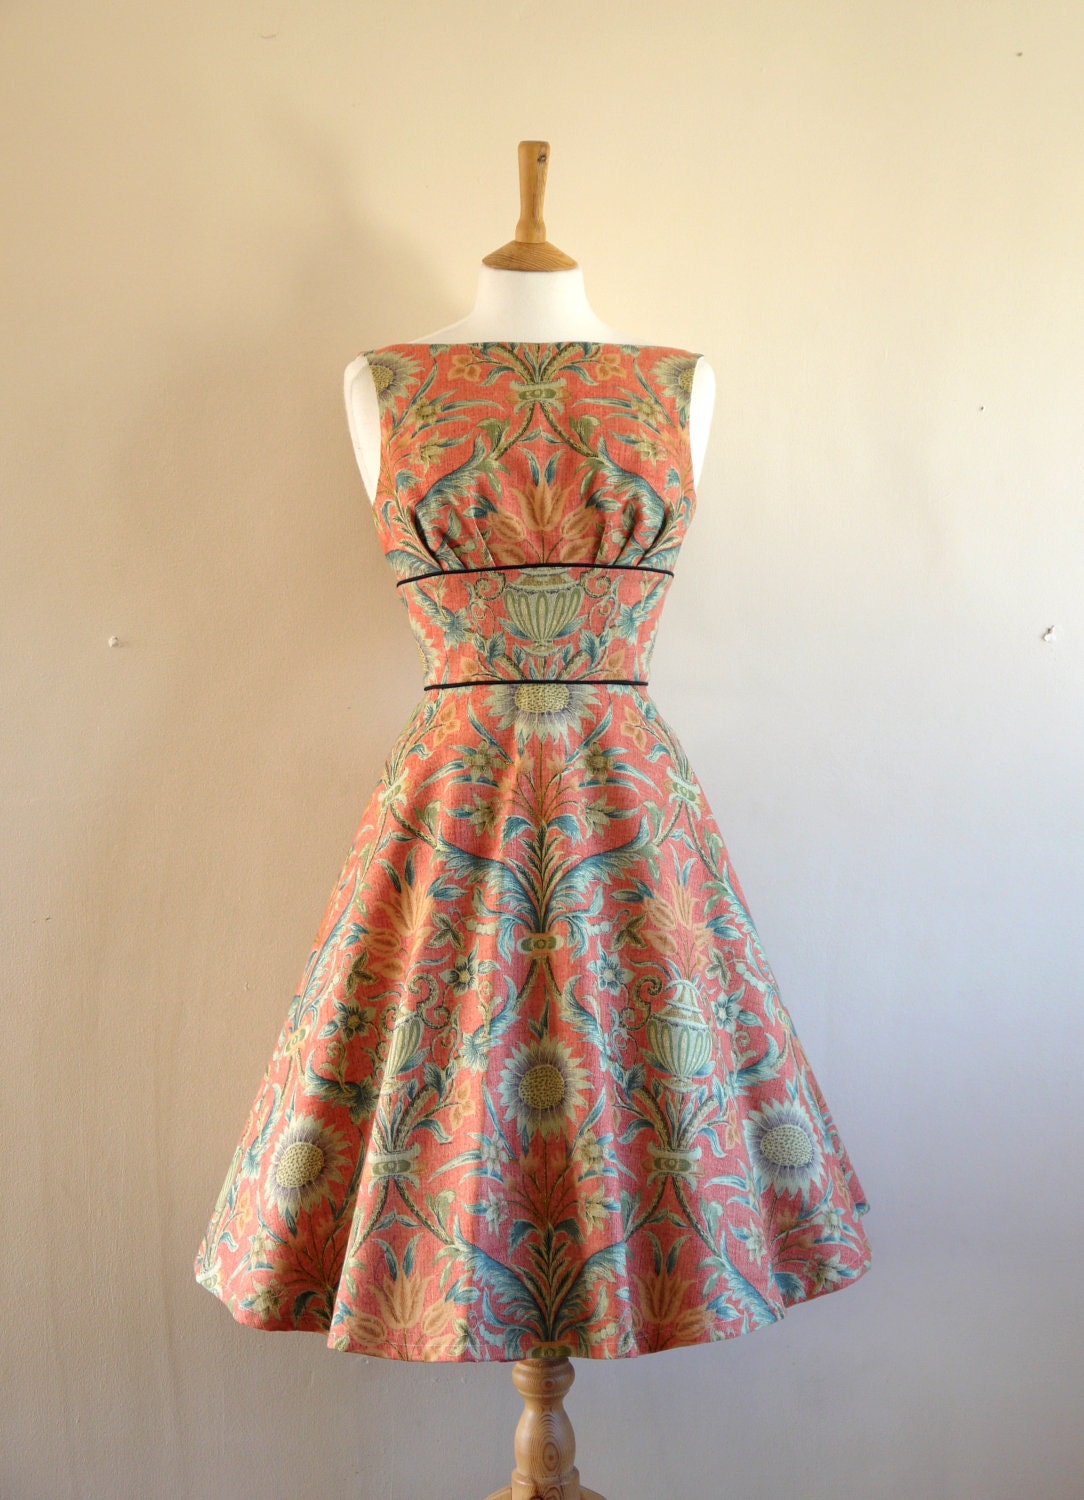 Sunflower and Vase Print Tea Dress - Made by Dig For Victory